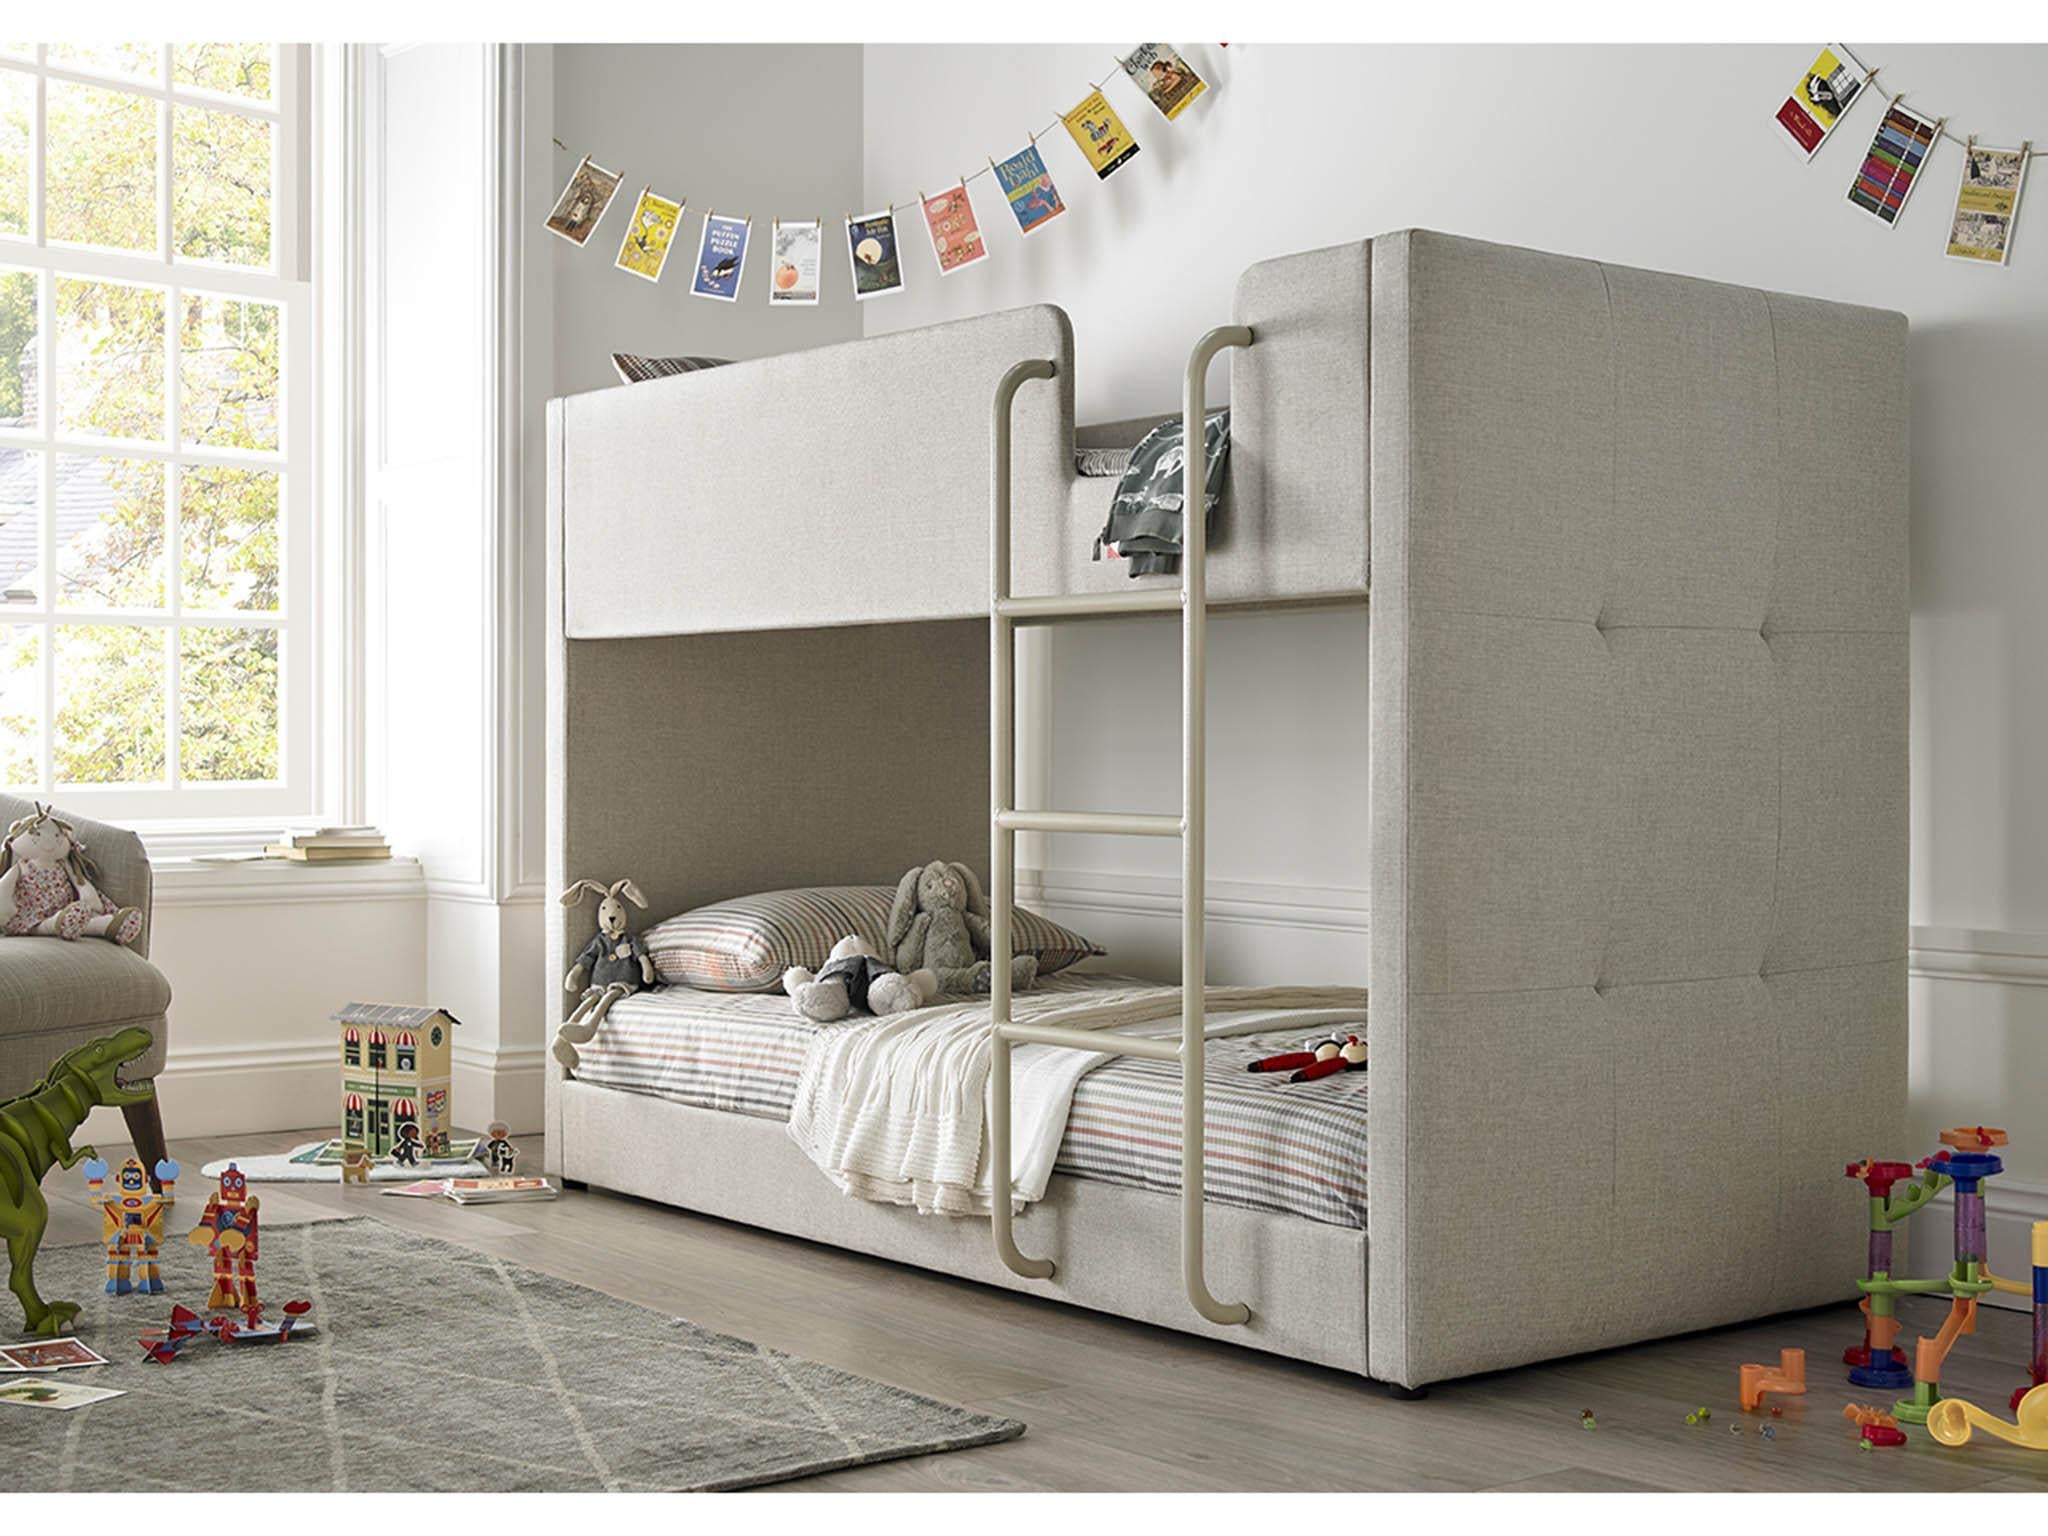 clifton kids cabin bed